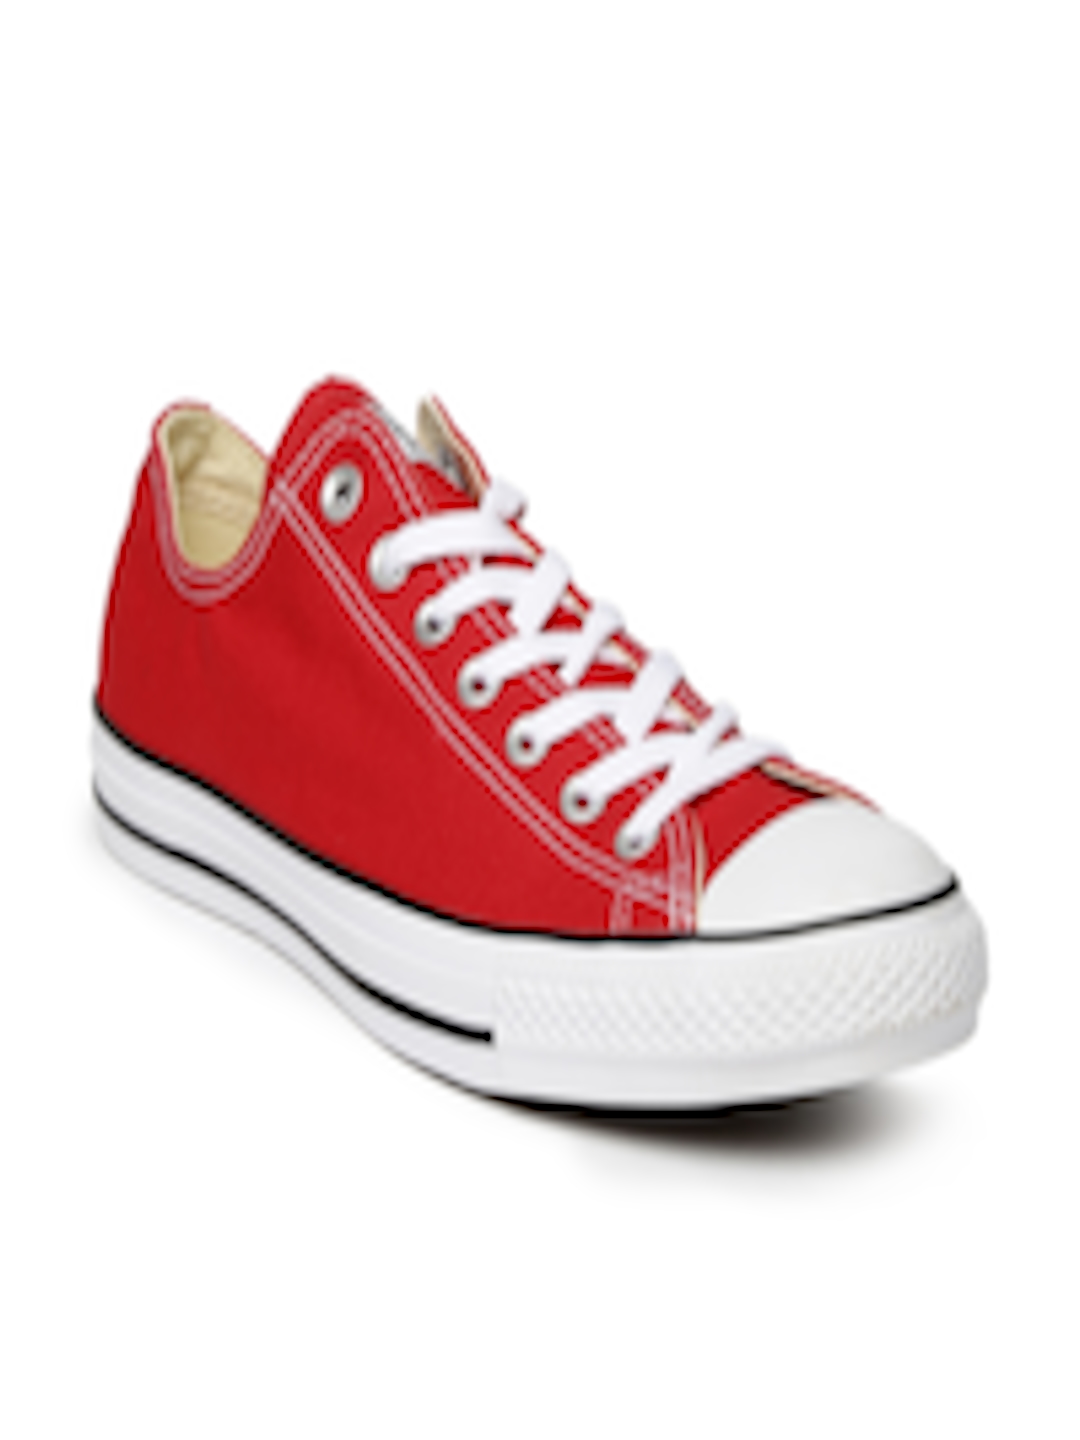 Buy Converse Unisex Red Sneakers - Casual Shoes for Unisex 1338553 | Myntra